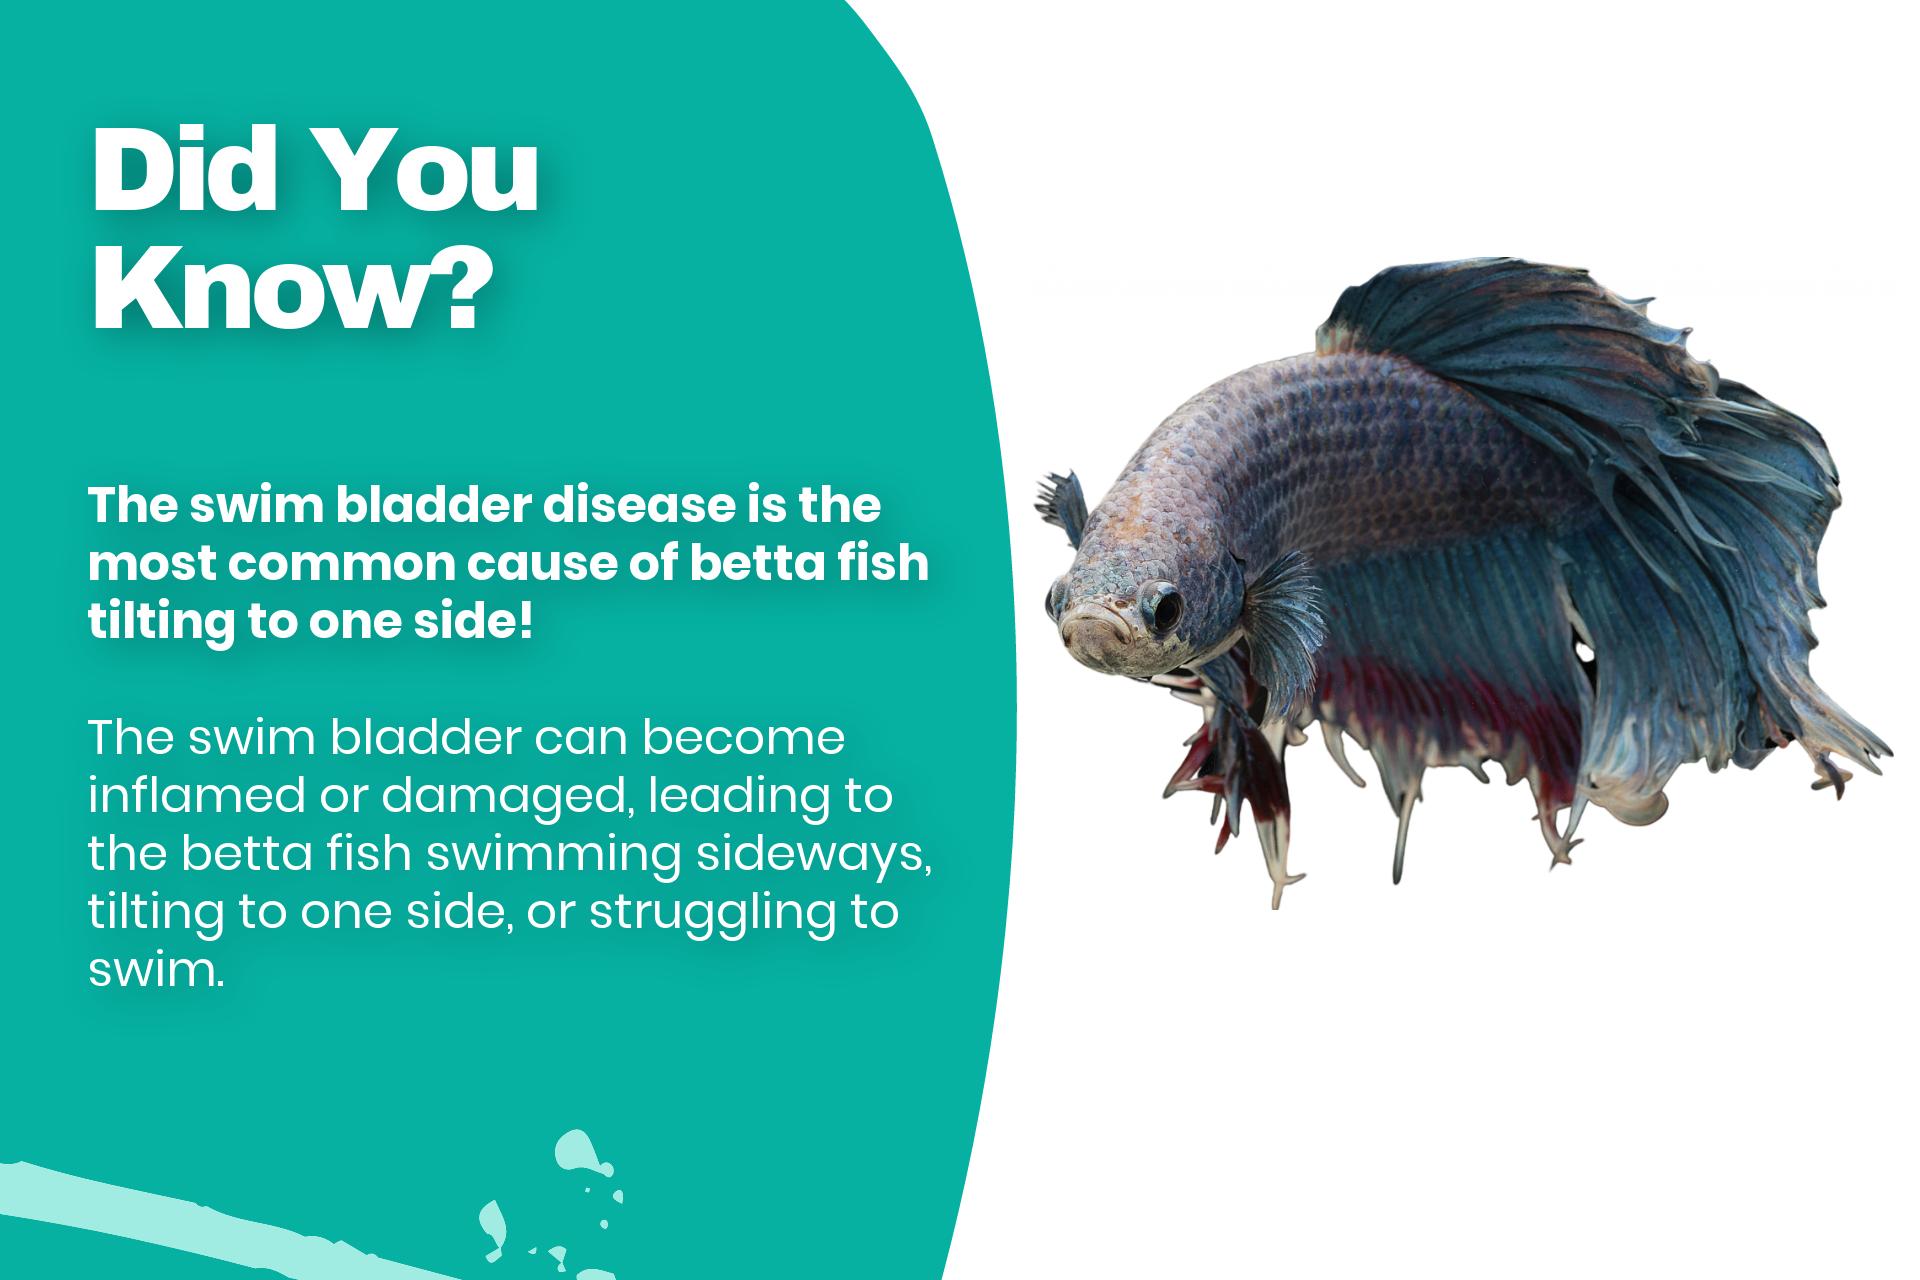 The swim bladder disease is the most common cause of betta fish tilting to one side